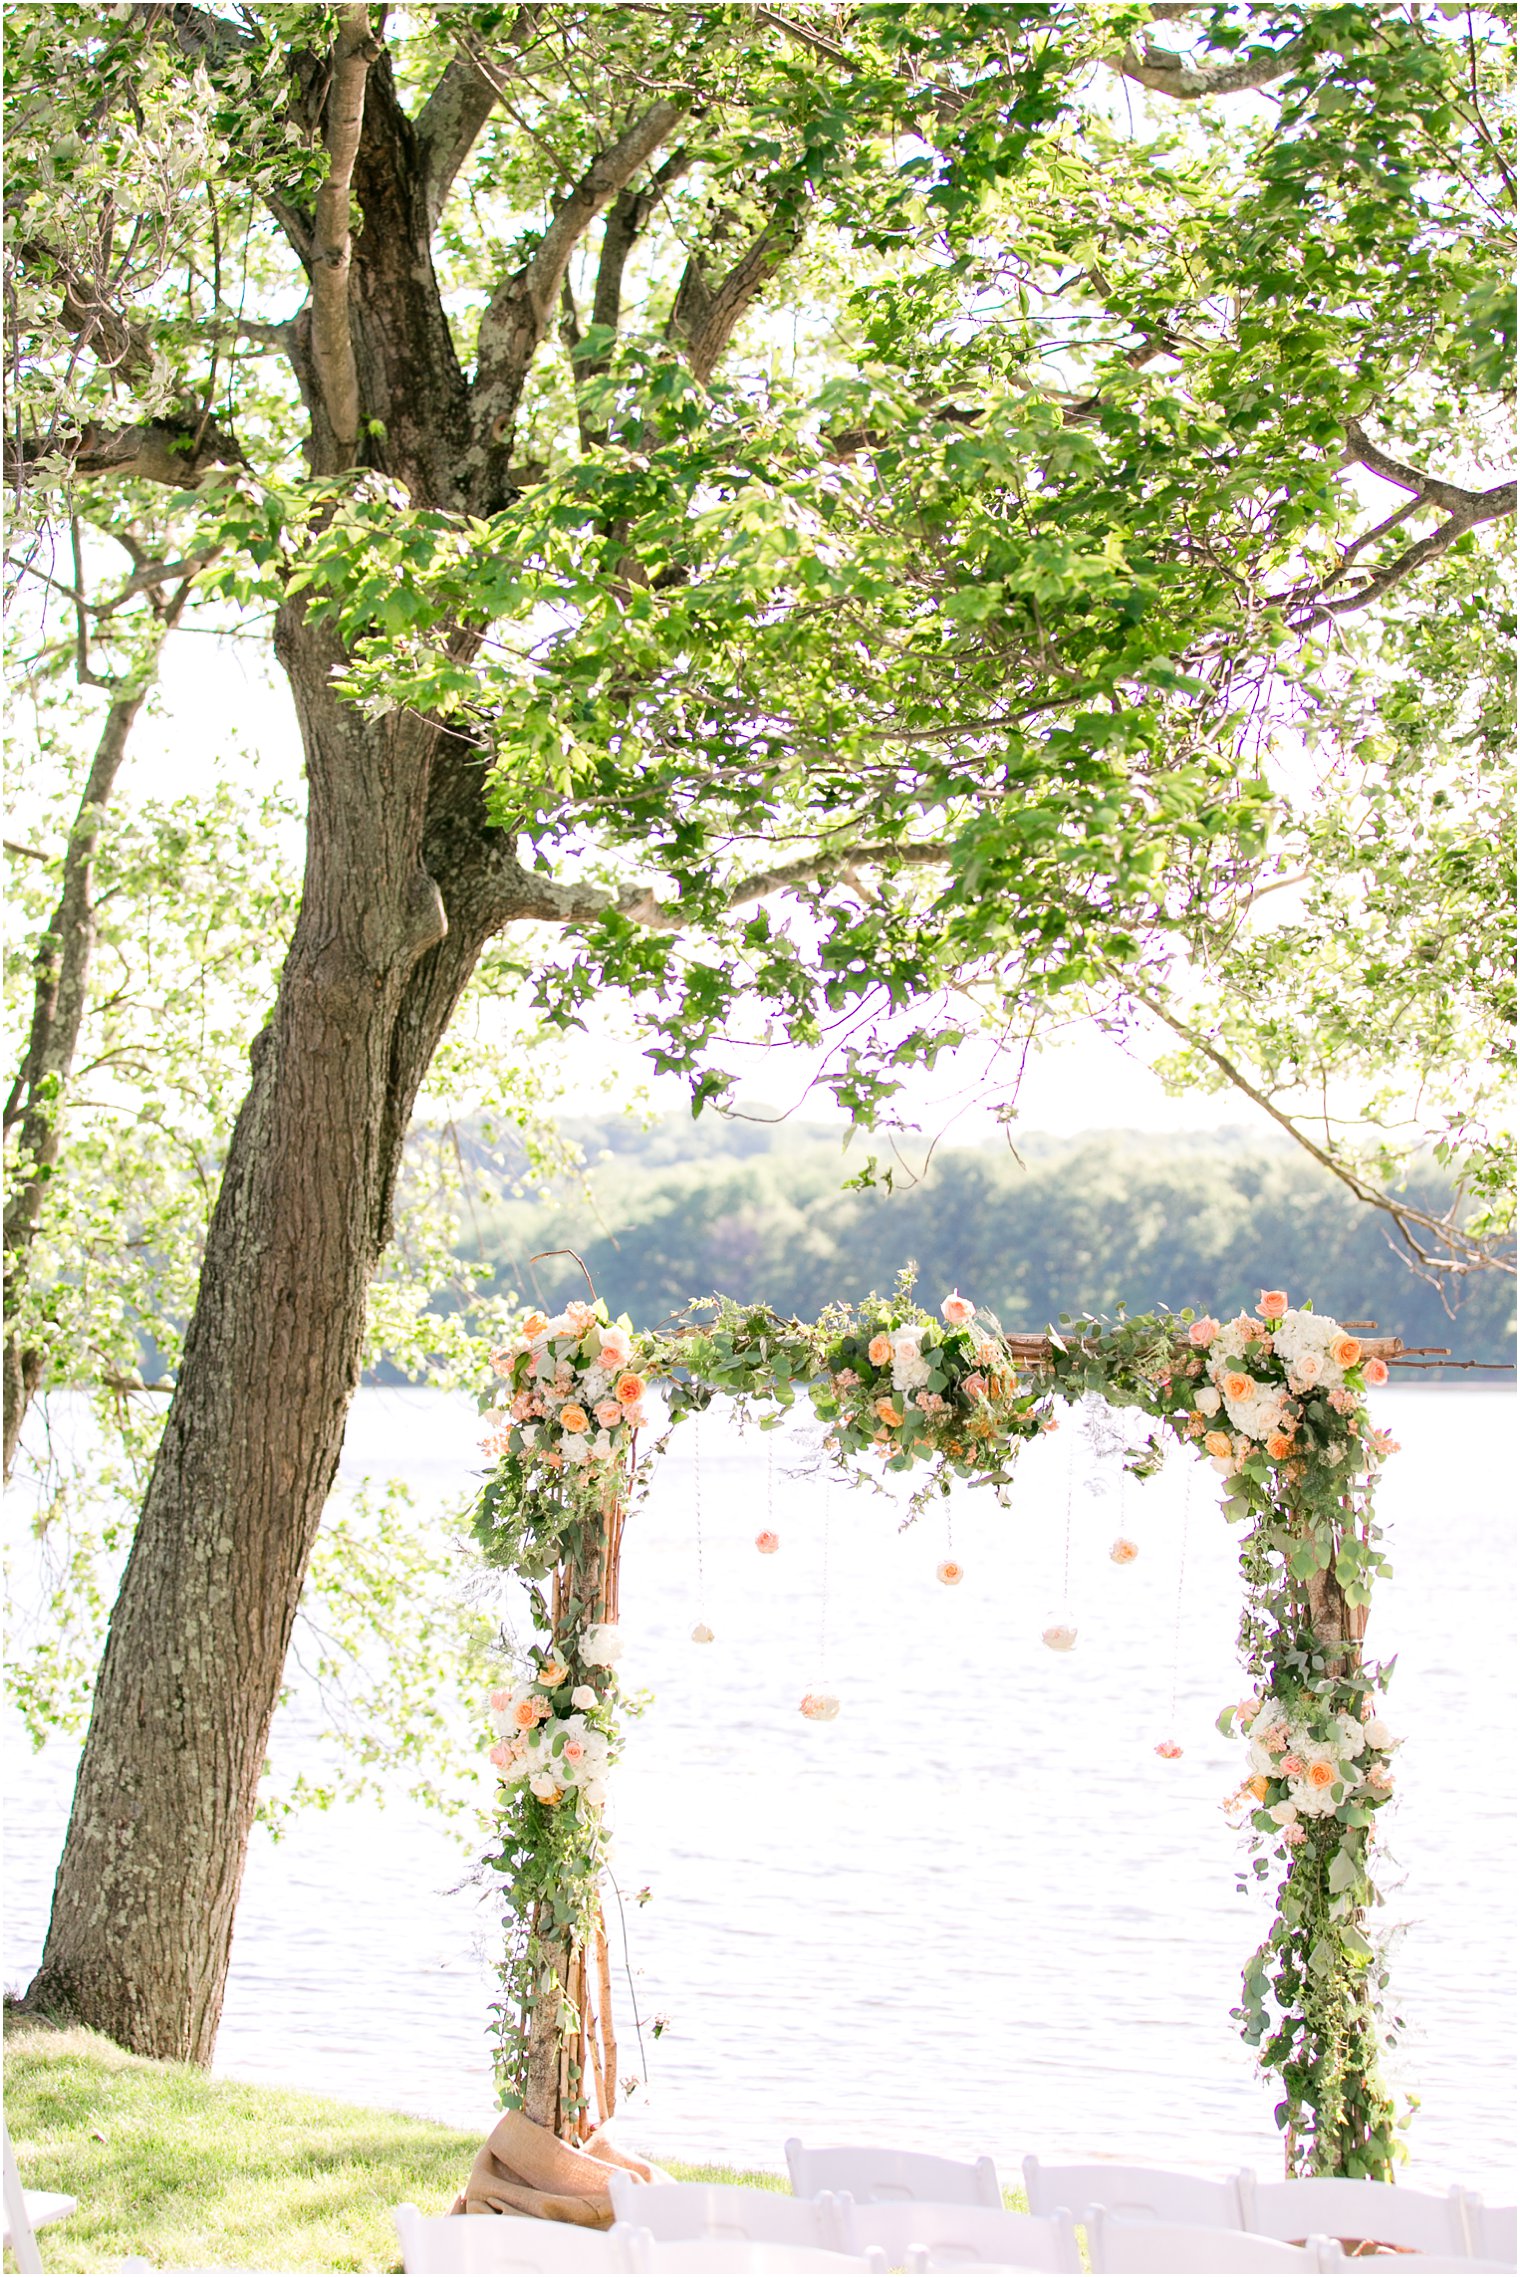 Wedding ceremony florals by Laurelwood Designs at Indian Trail Club